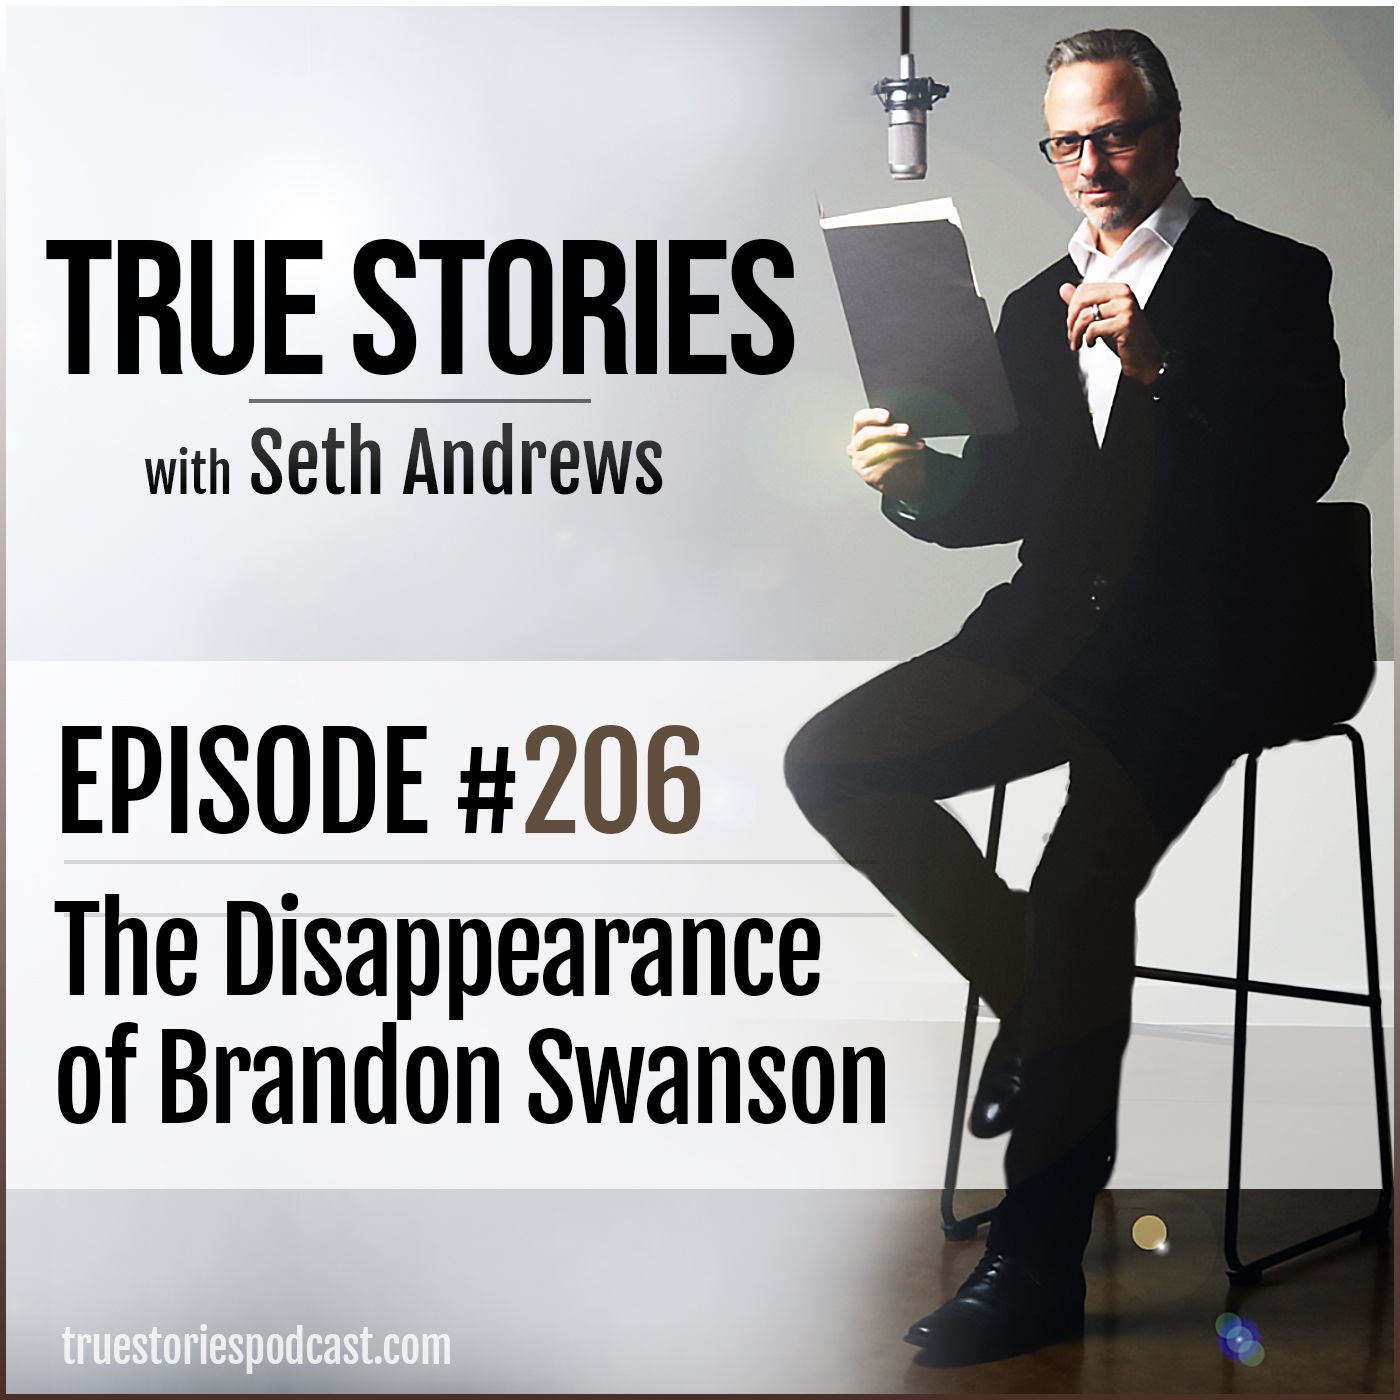 True Stories #206 - The Disappearance of Brandon Swanson